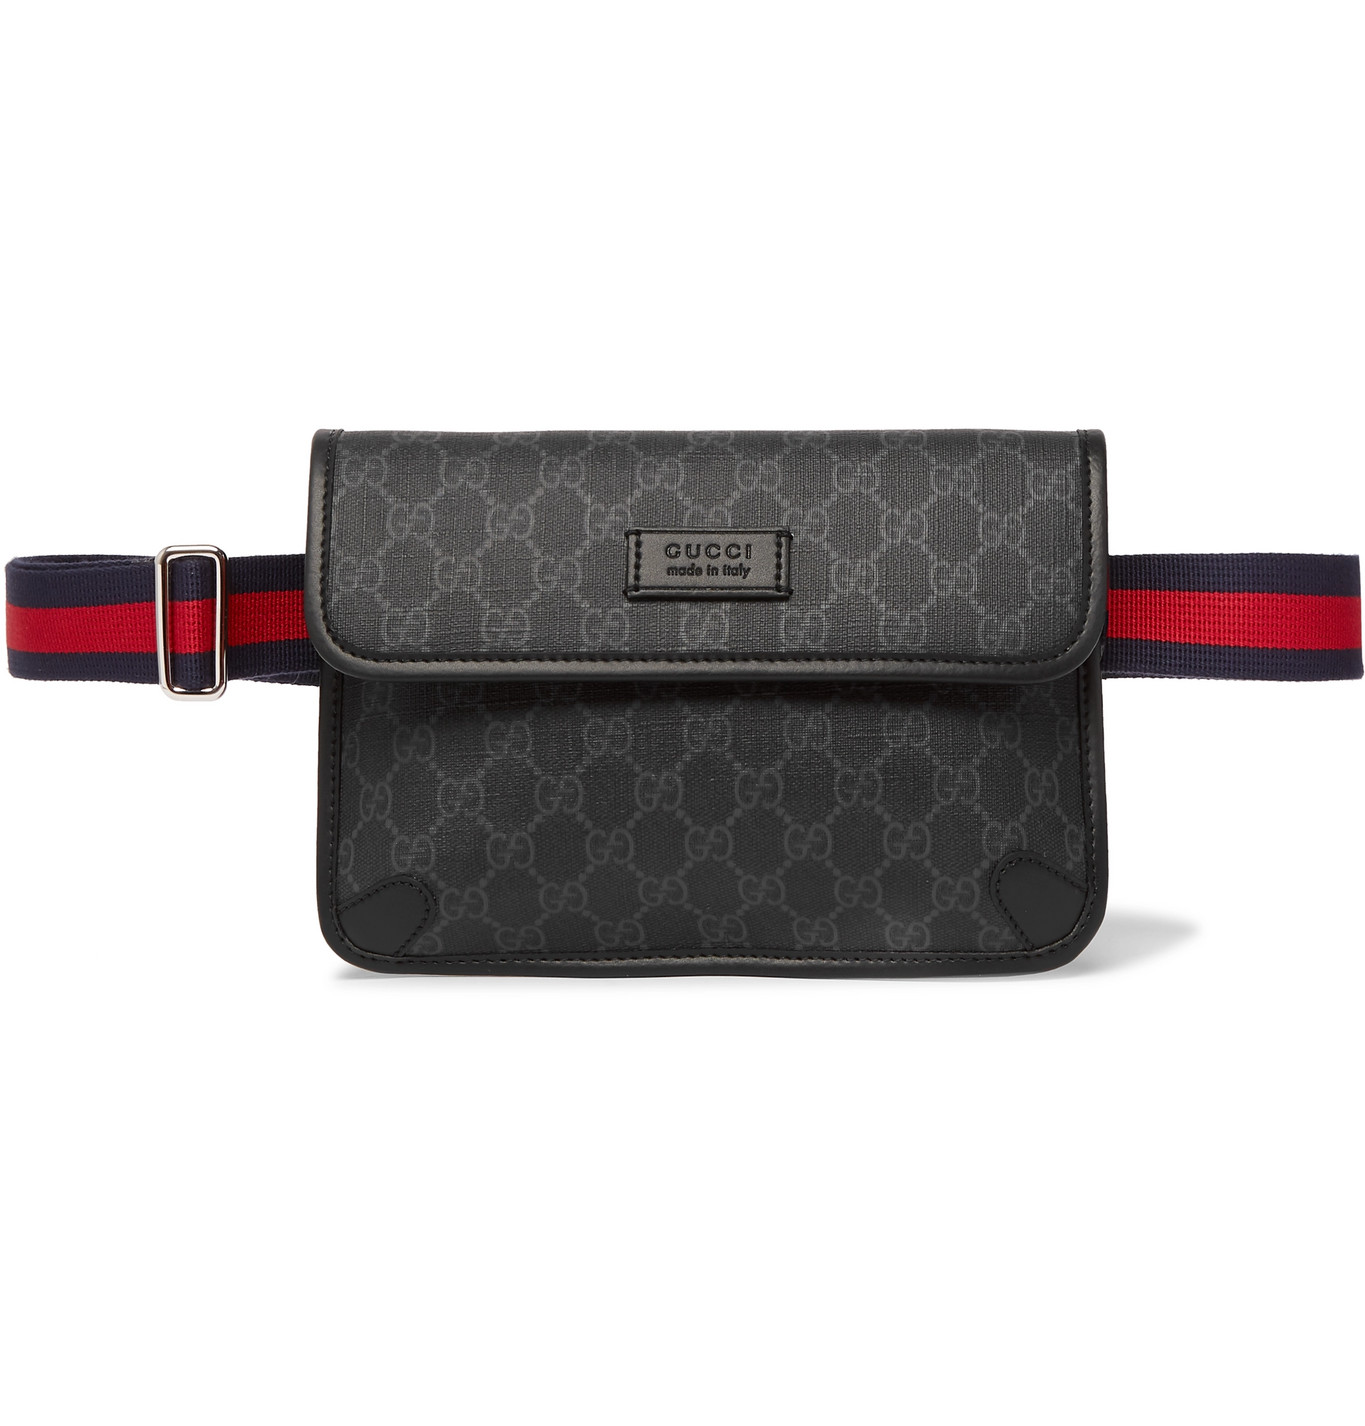 Gucci - Leather-Trimmed Monogrammed 